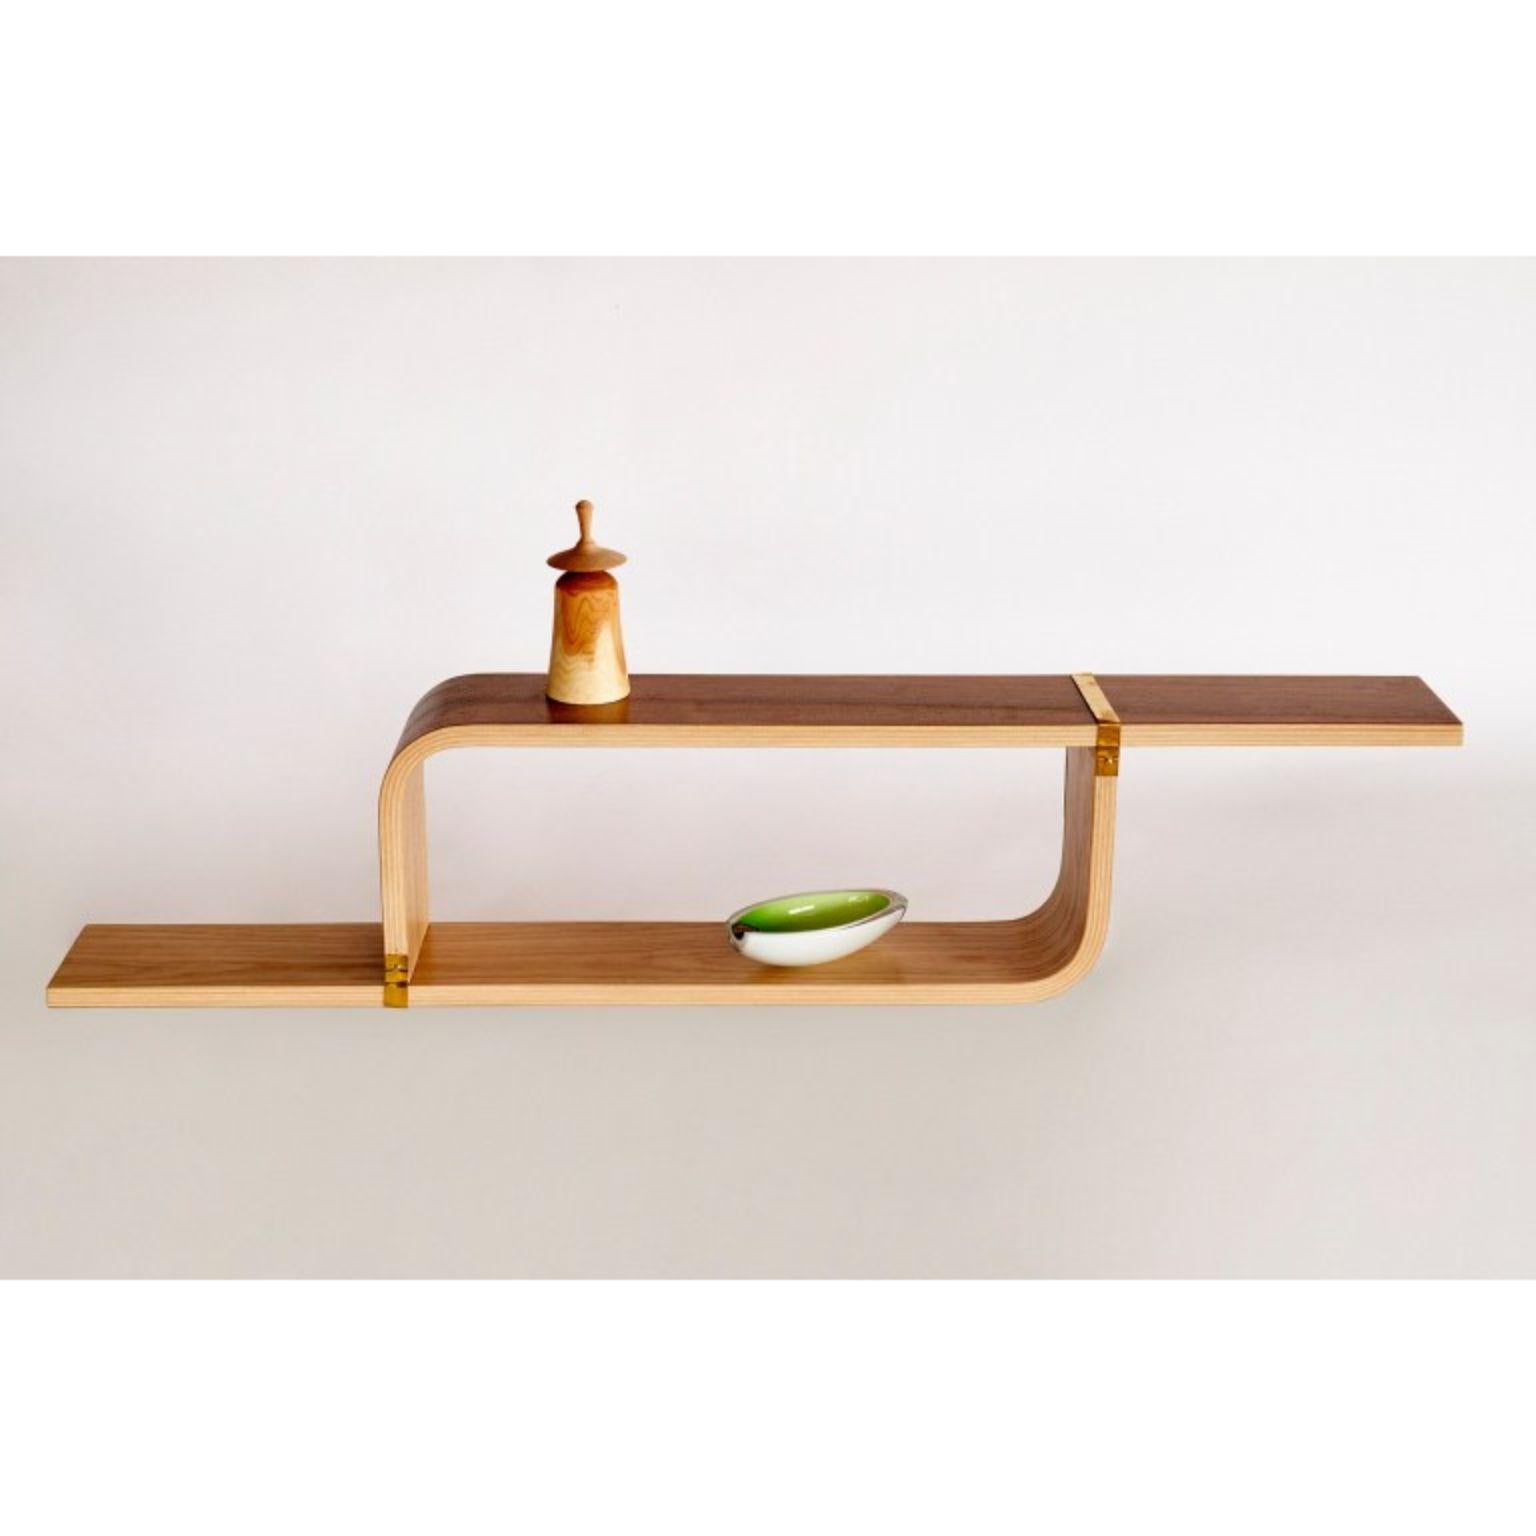 Zic-zac shelf by Jean-Baptiste Van den Heede
Signed, Limited edition
Dimensions: L 82 x W 13 x H 24 cm
Materials: Plywood of oak and walnut

Measurements:
Minimum: 82 cm long.
Maximum: 140 cm long.
2 cm thick wood

The Zic-Zac shelf is an